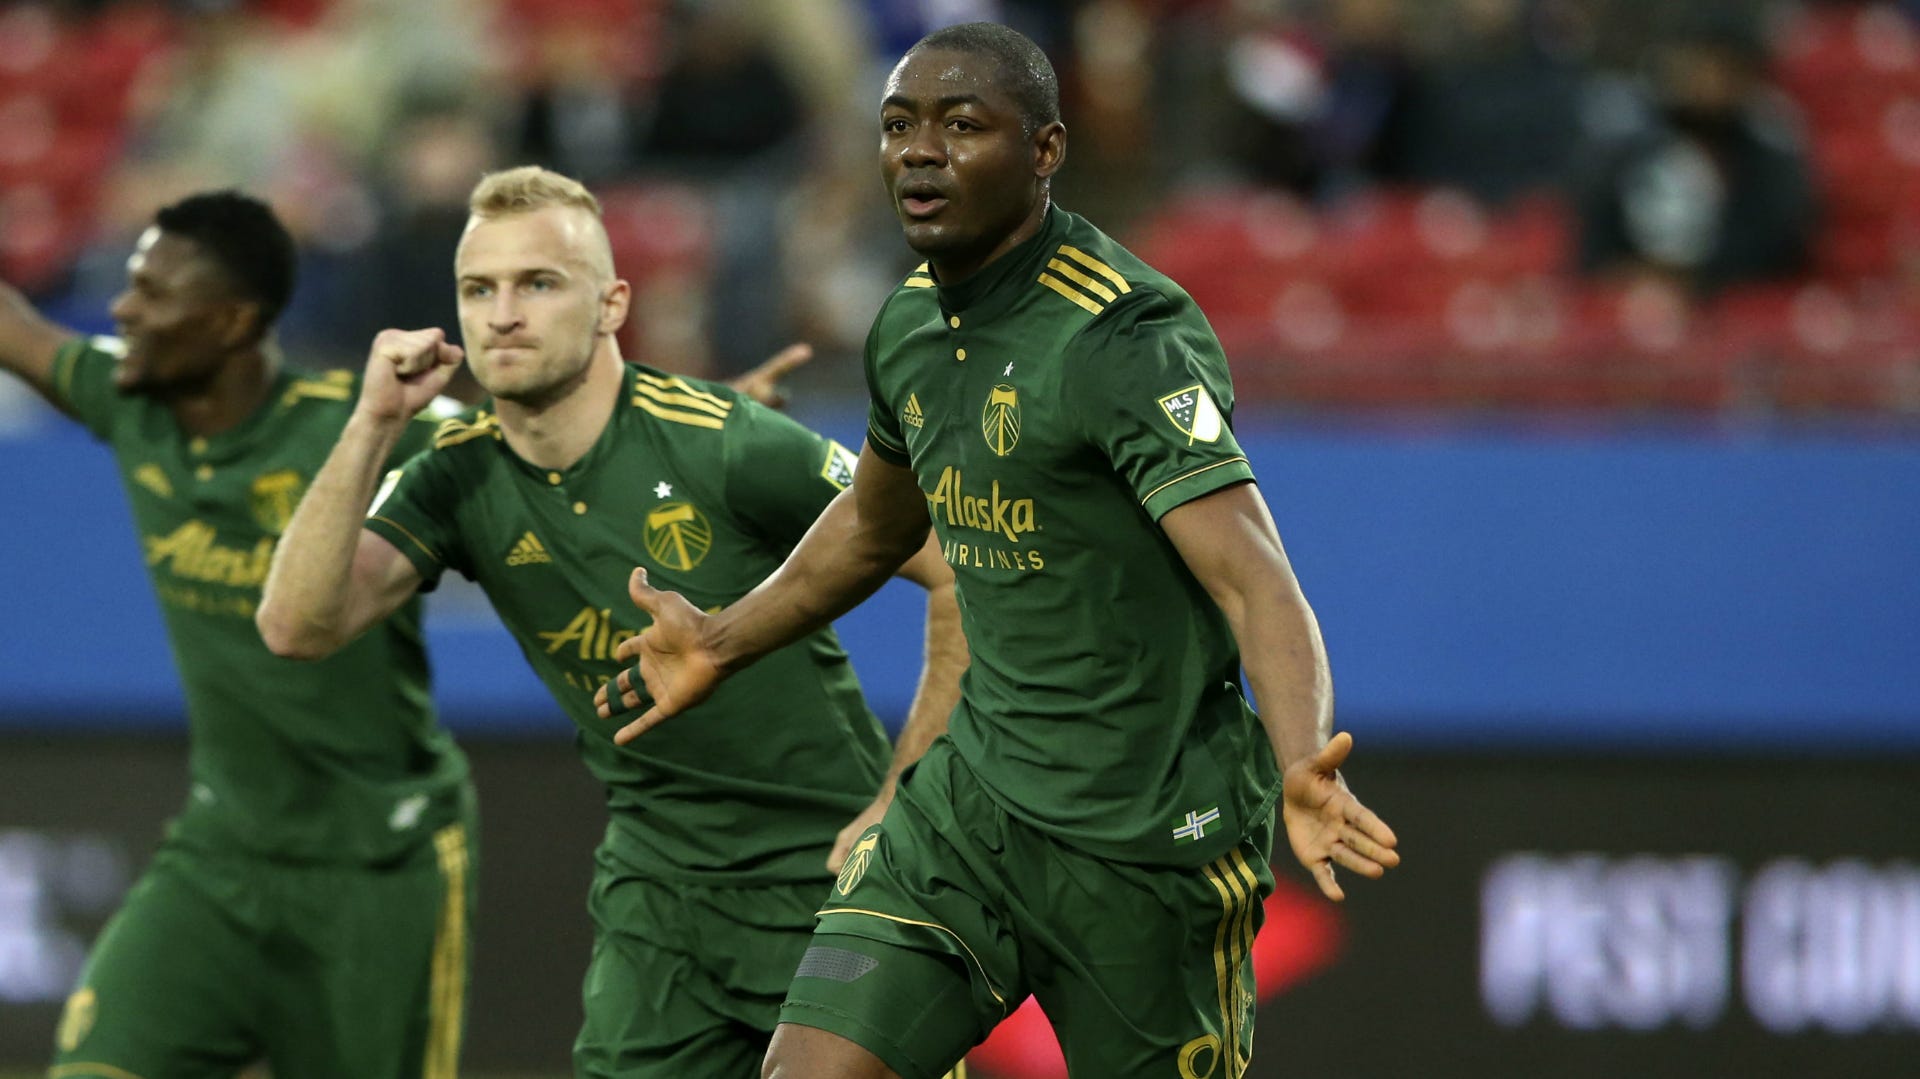 Diego Valeri included in Portland Timbers' roster ahead of the